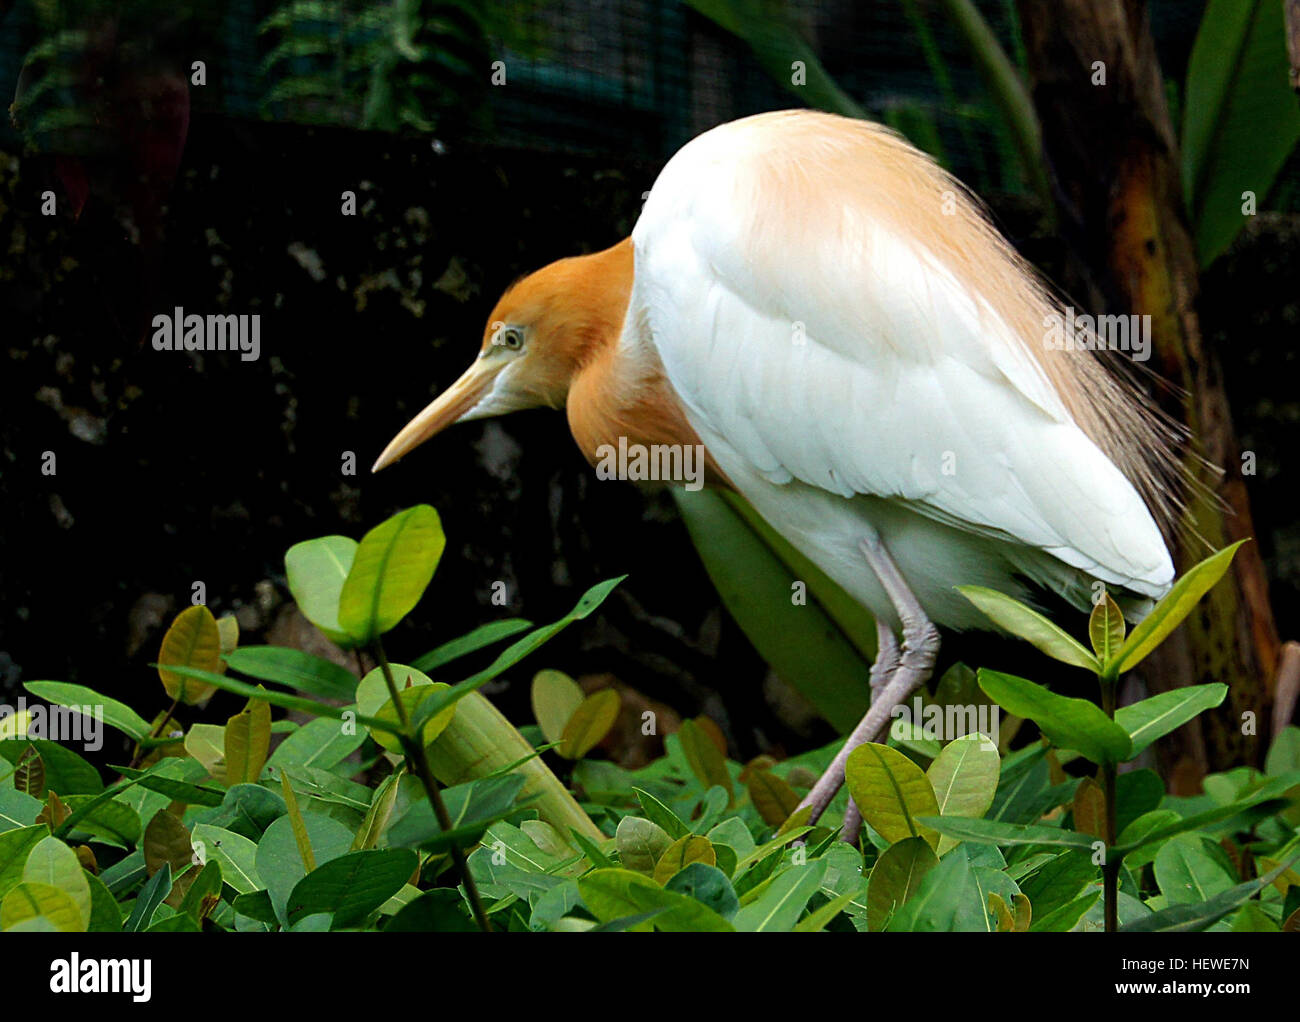 The cattle egret (Bubulcus ibis) is a cosmopolitan species of heron (family Ardeidae) found in the tropics, subtropics and warm temperate zones. It is the only member of the monotypic genus Bubulcus, although some authorities regard its two subspecies as full species, the western cattle egret and the eastern cattle egret. Despite the similarities in plumage to the egrets of the genus Egretta, it is more closely related to the herons of Ardea. Originally native to parts of Asia, Africa and Europe, it has undergone a rapid expansion in its distribution and successfully colonised much of the rest Stock Photo